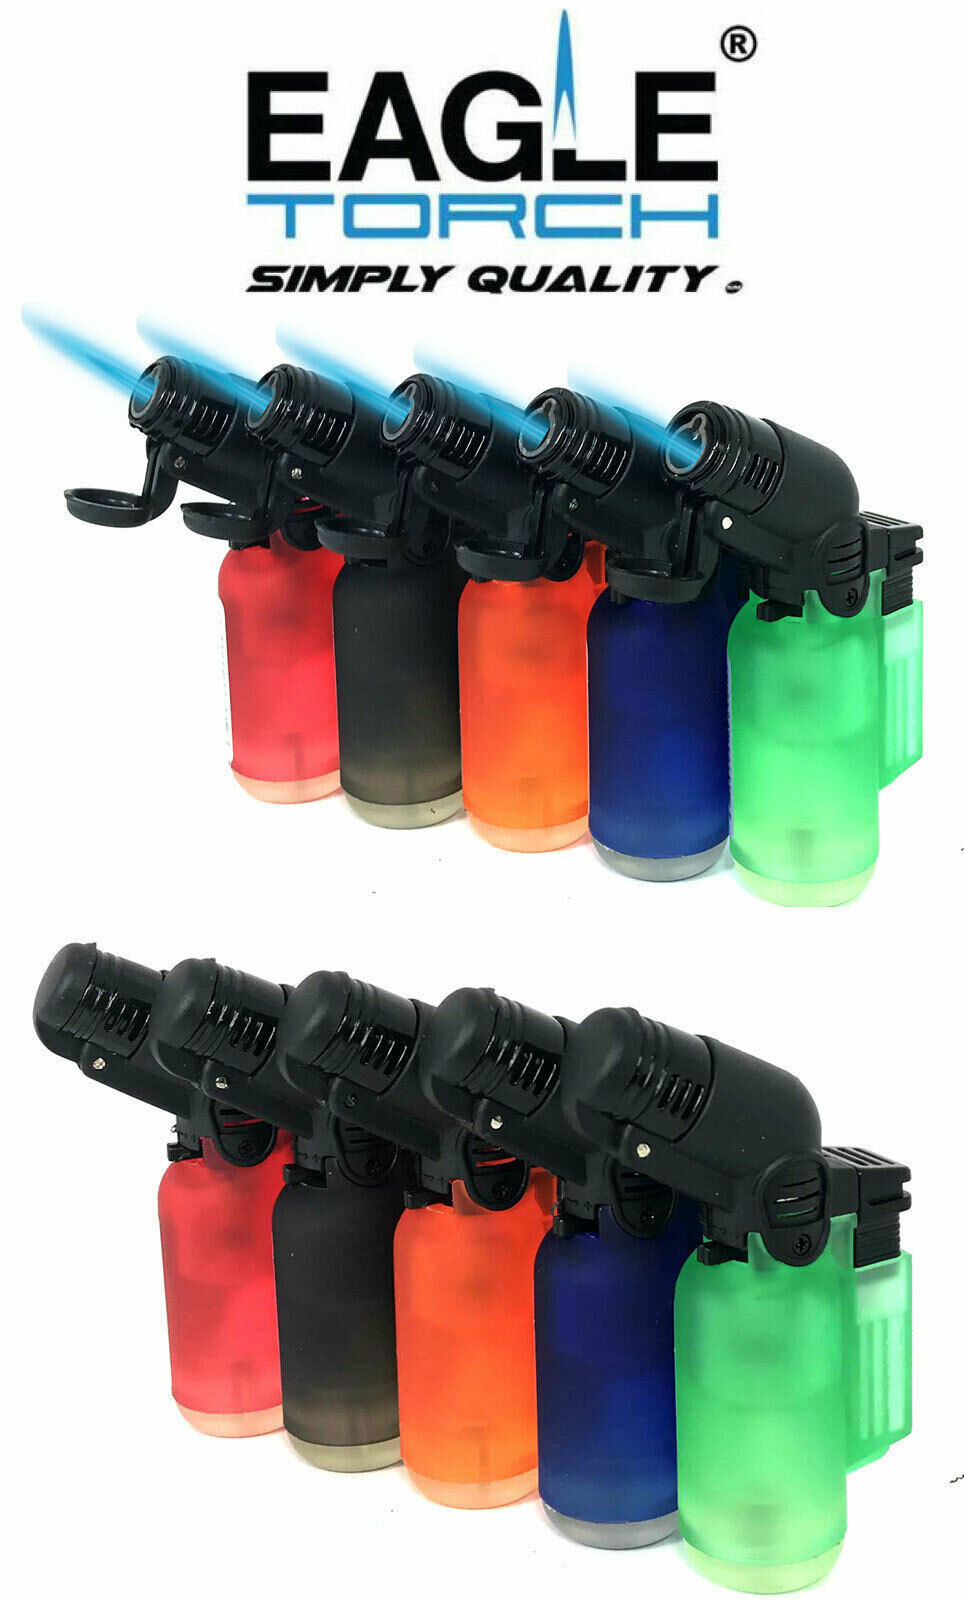 5 Pack 45 Degree Angle Jet Flame Torch Lighter Refillable